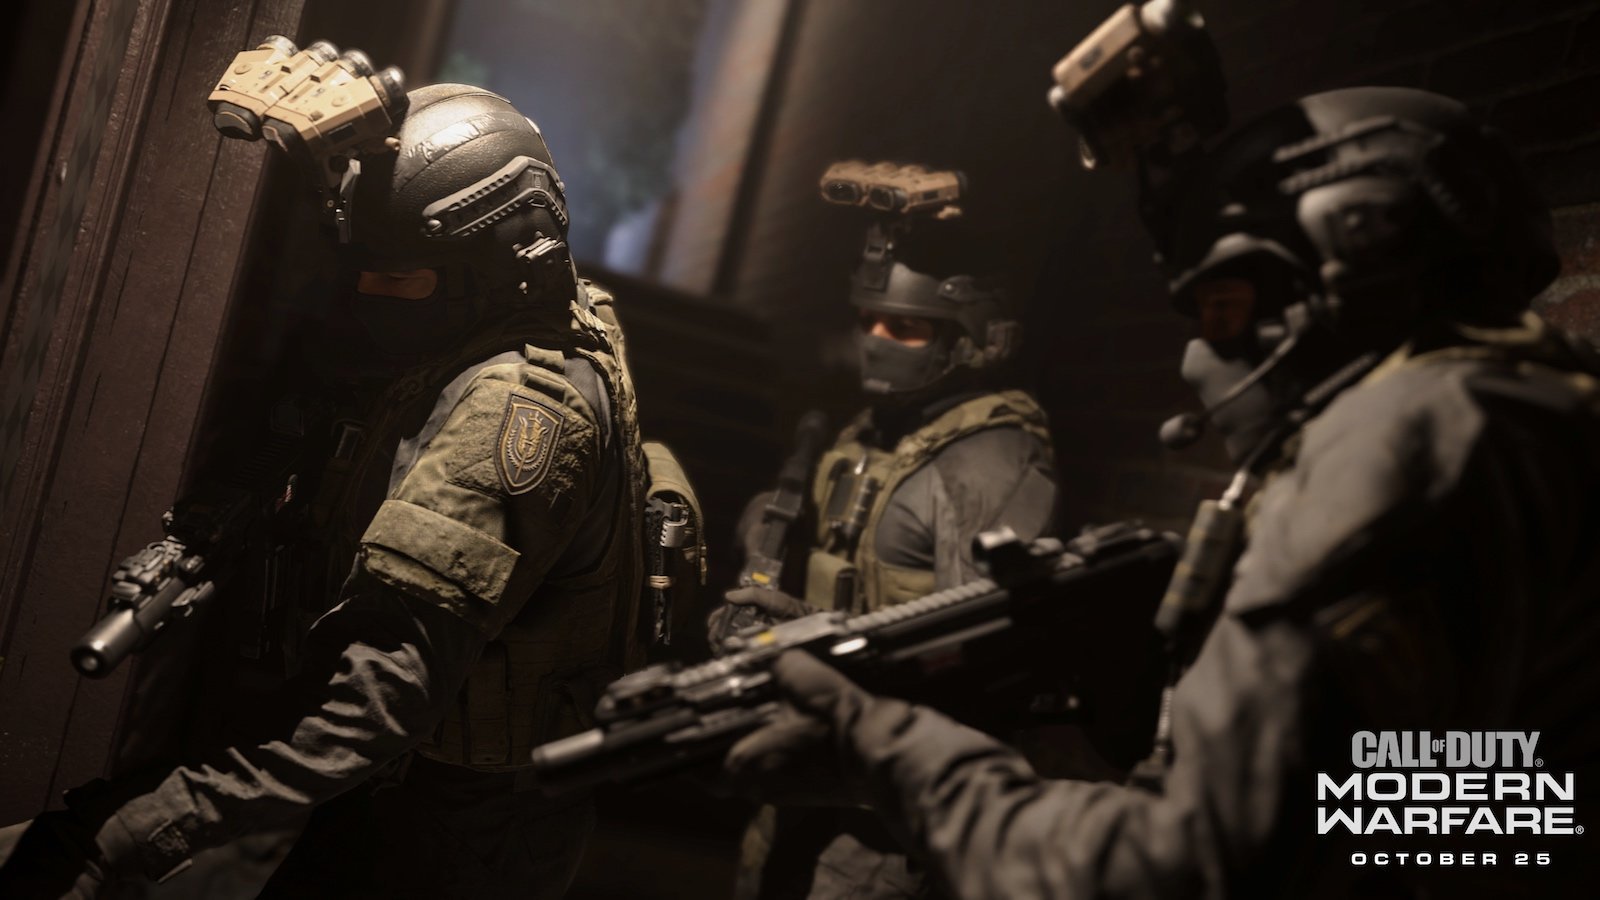 Call Of Duty Modern Warfare Will Not Feature A Zombie Mode For Realism Geek Culture